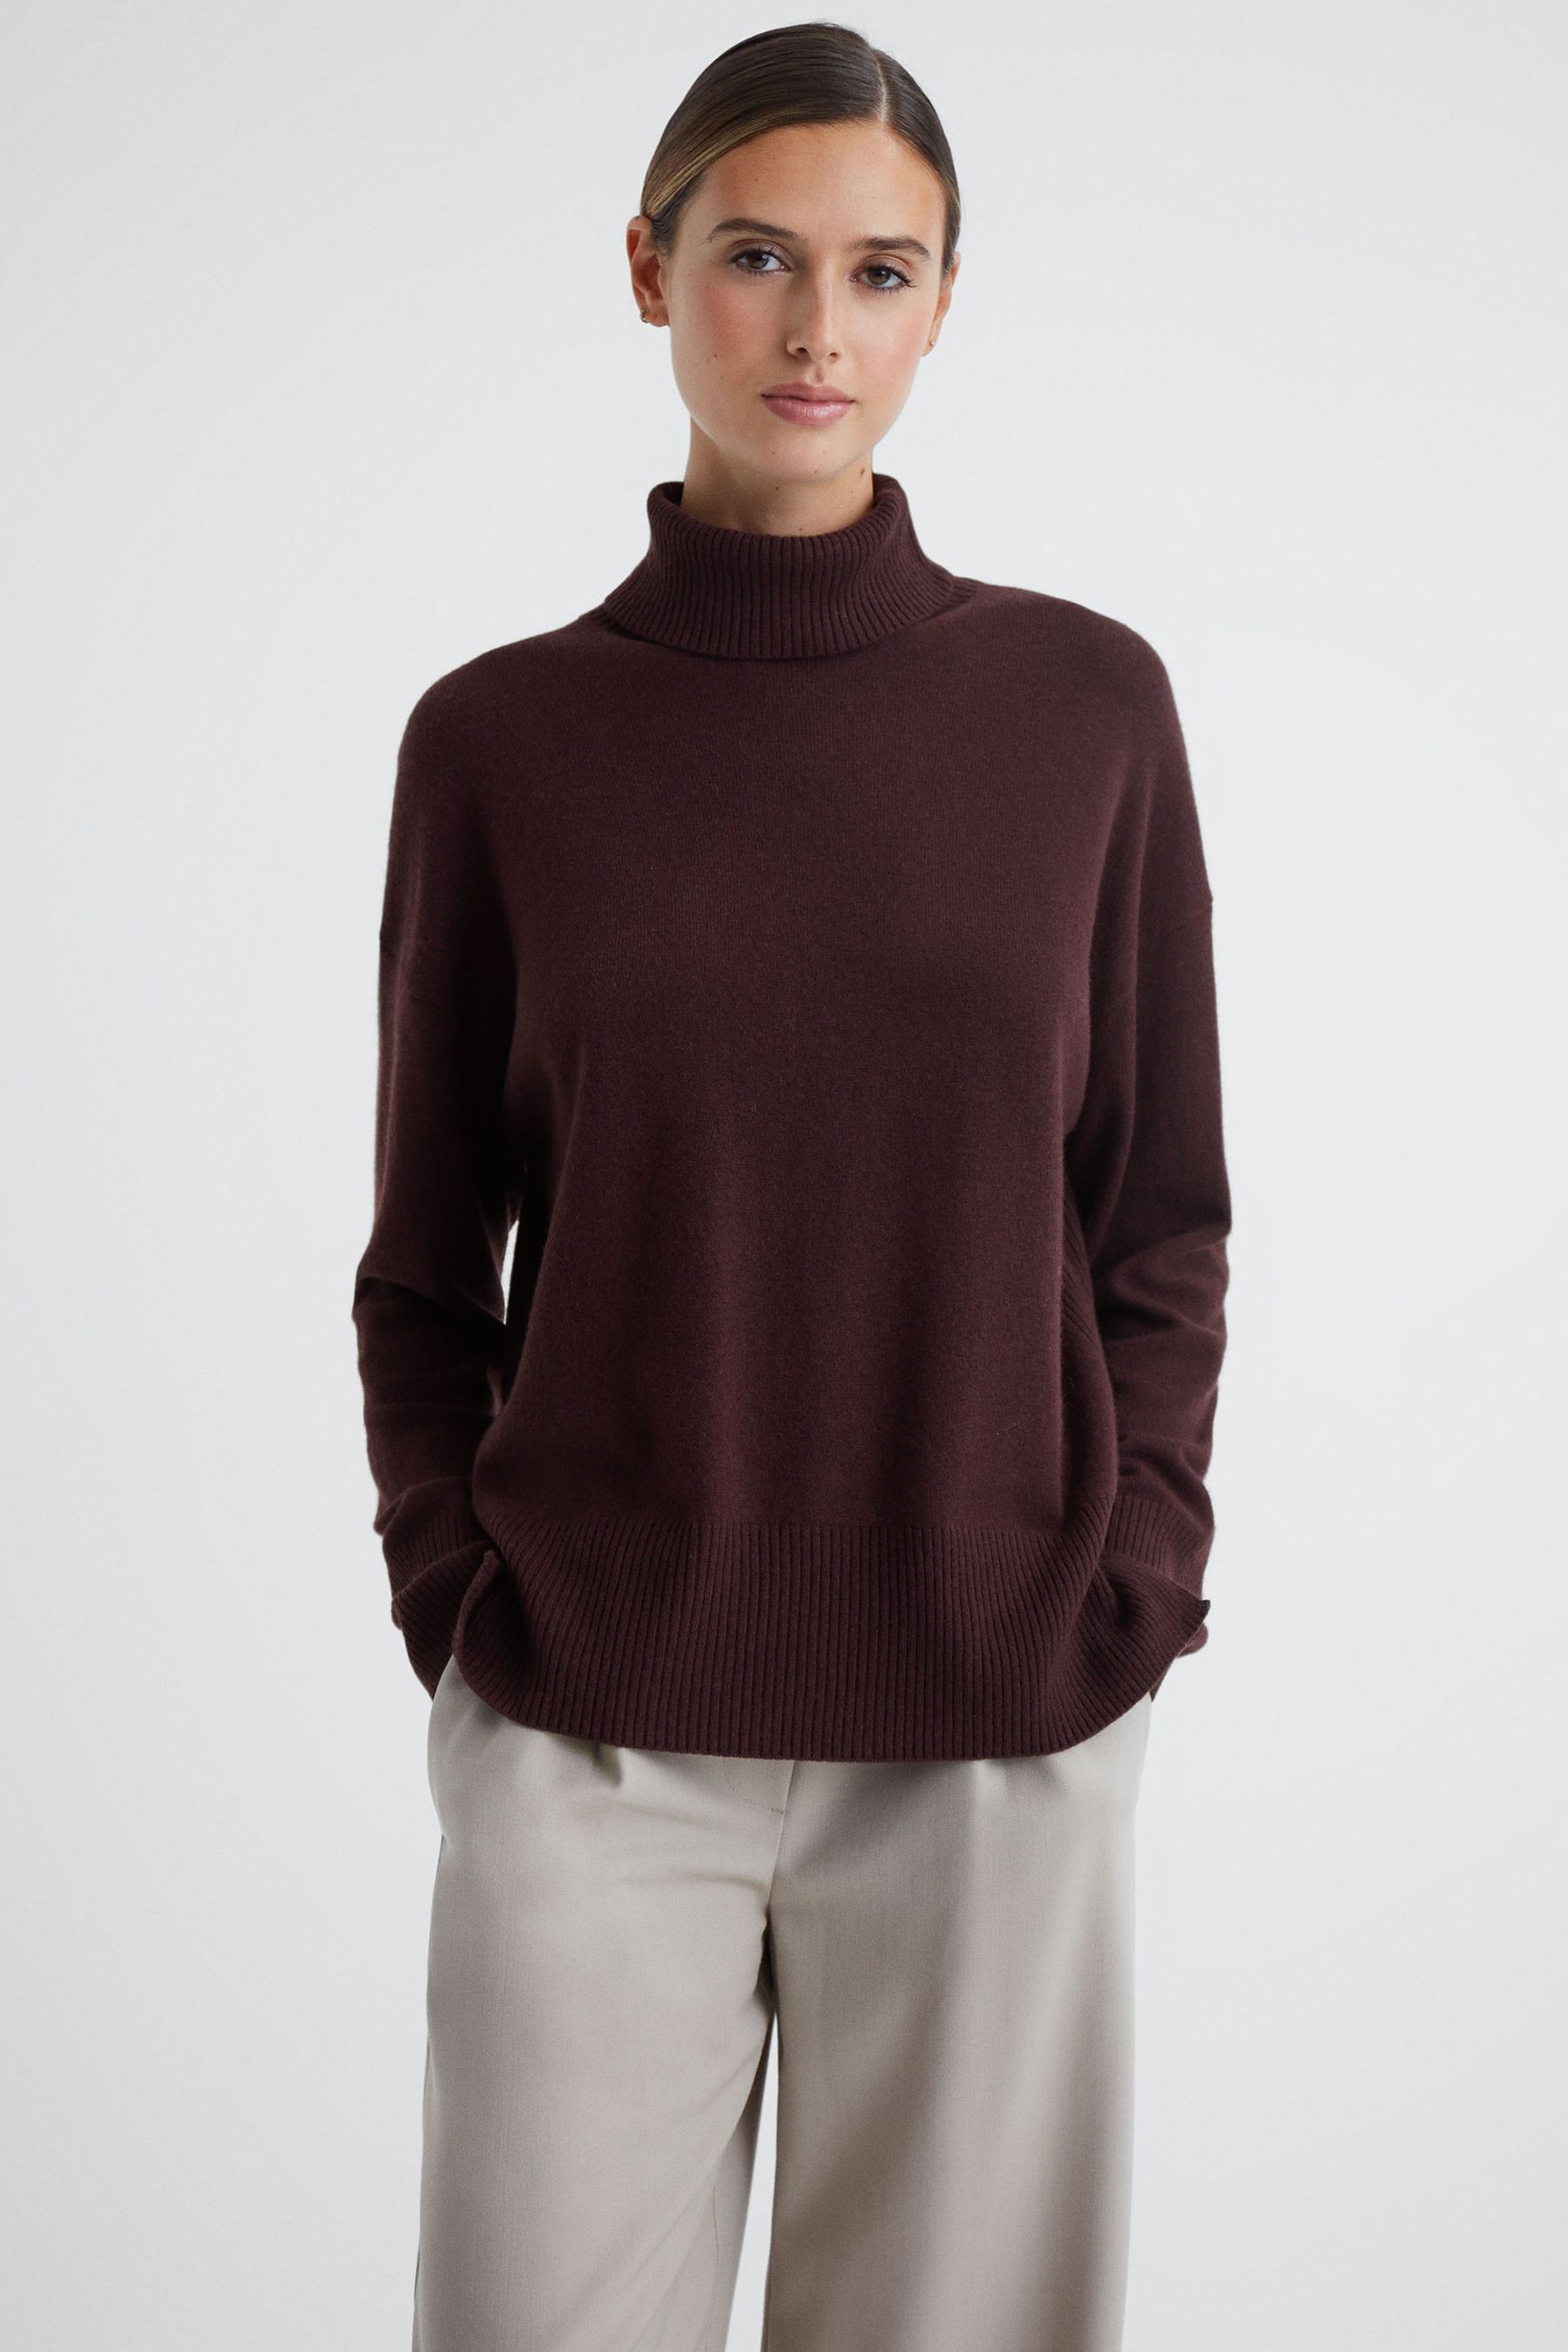 REISS ALEXIS - BERRY CASHMERE WOOL FUNNEL NECK JUMPER, XS